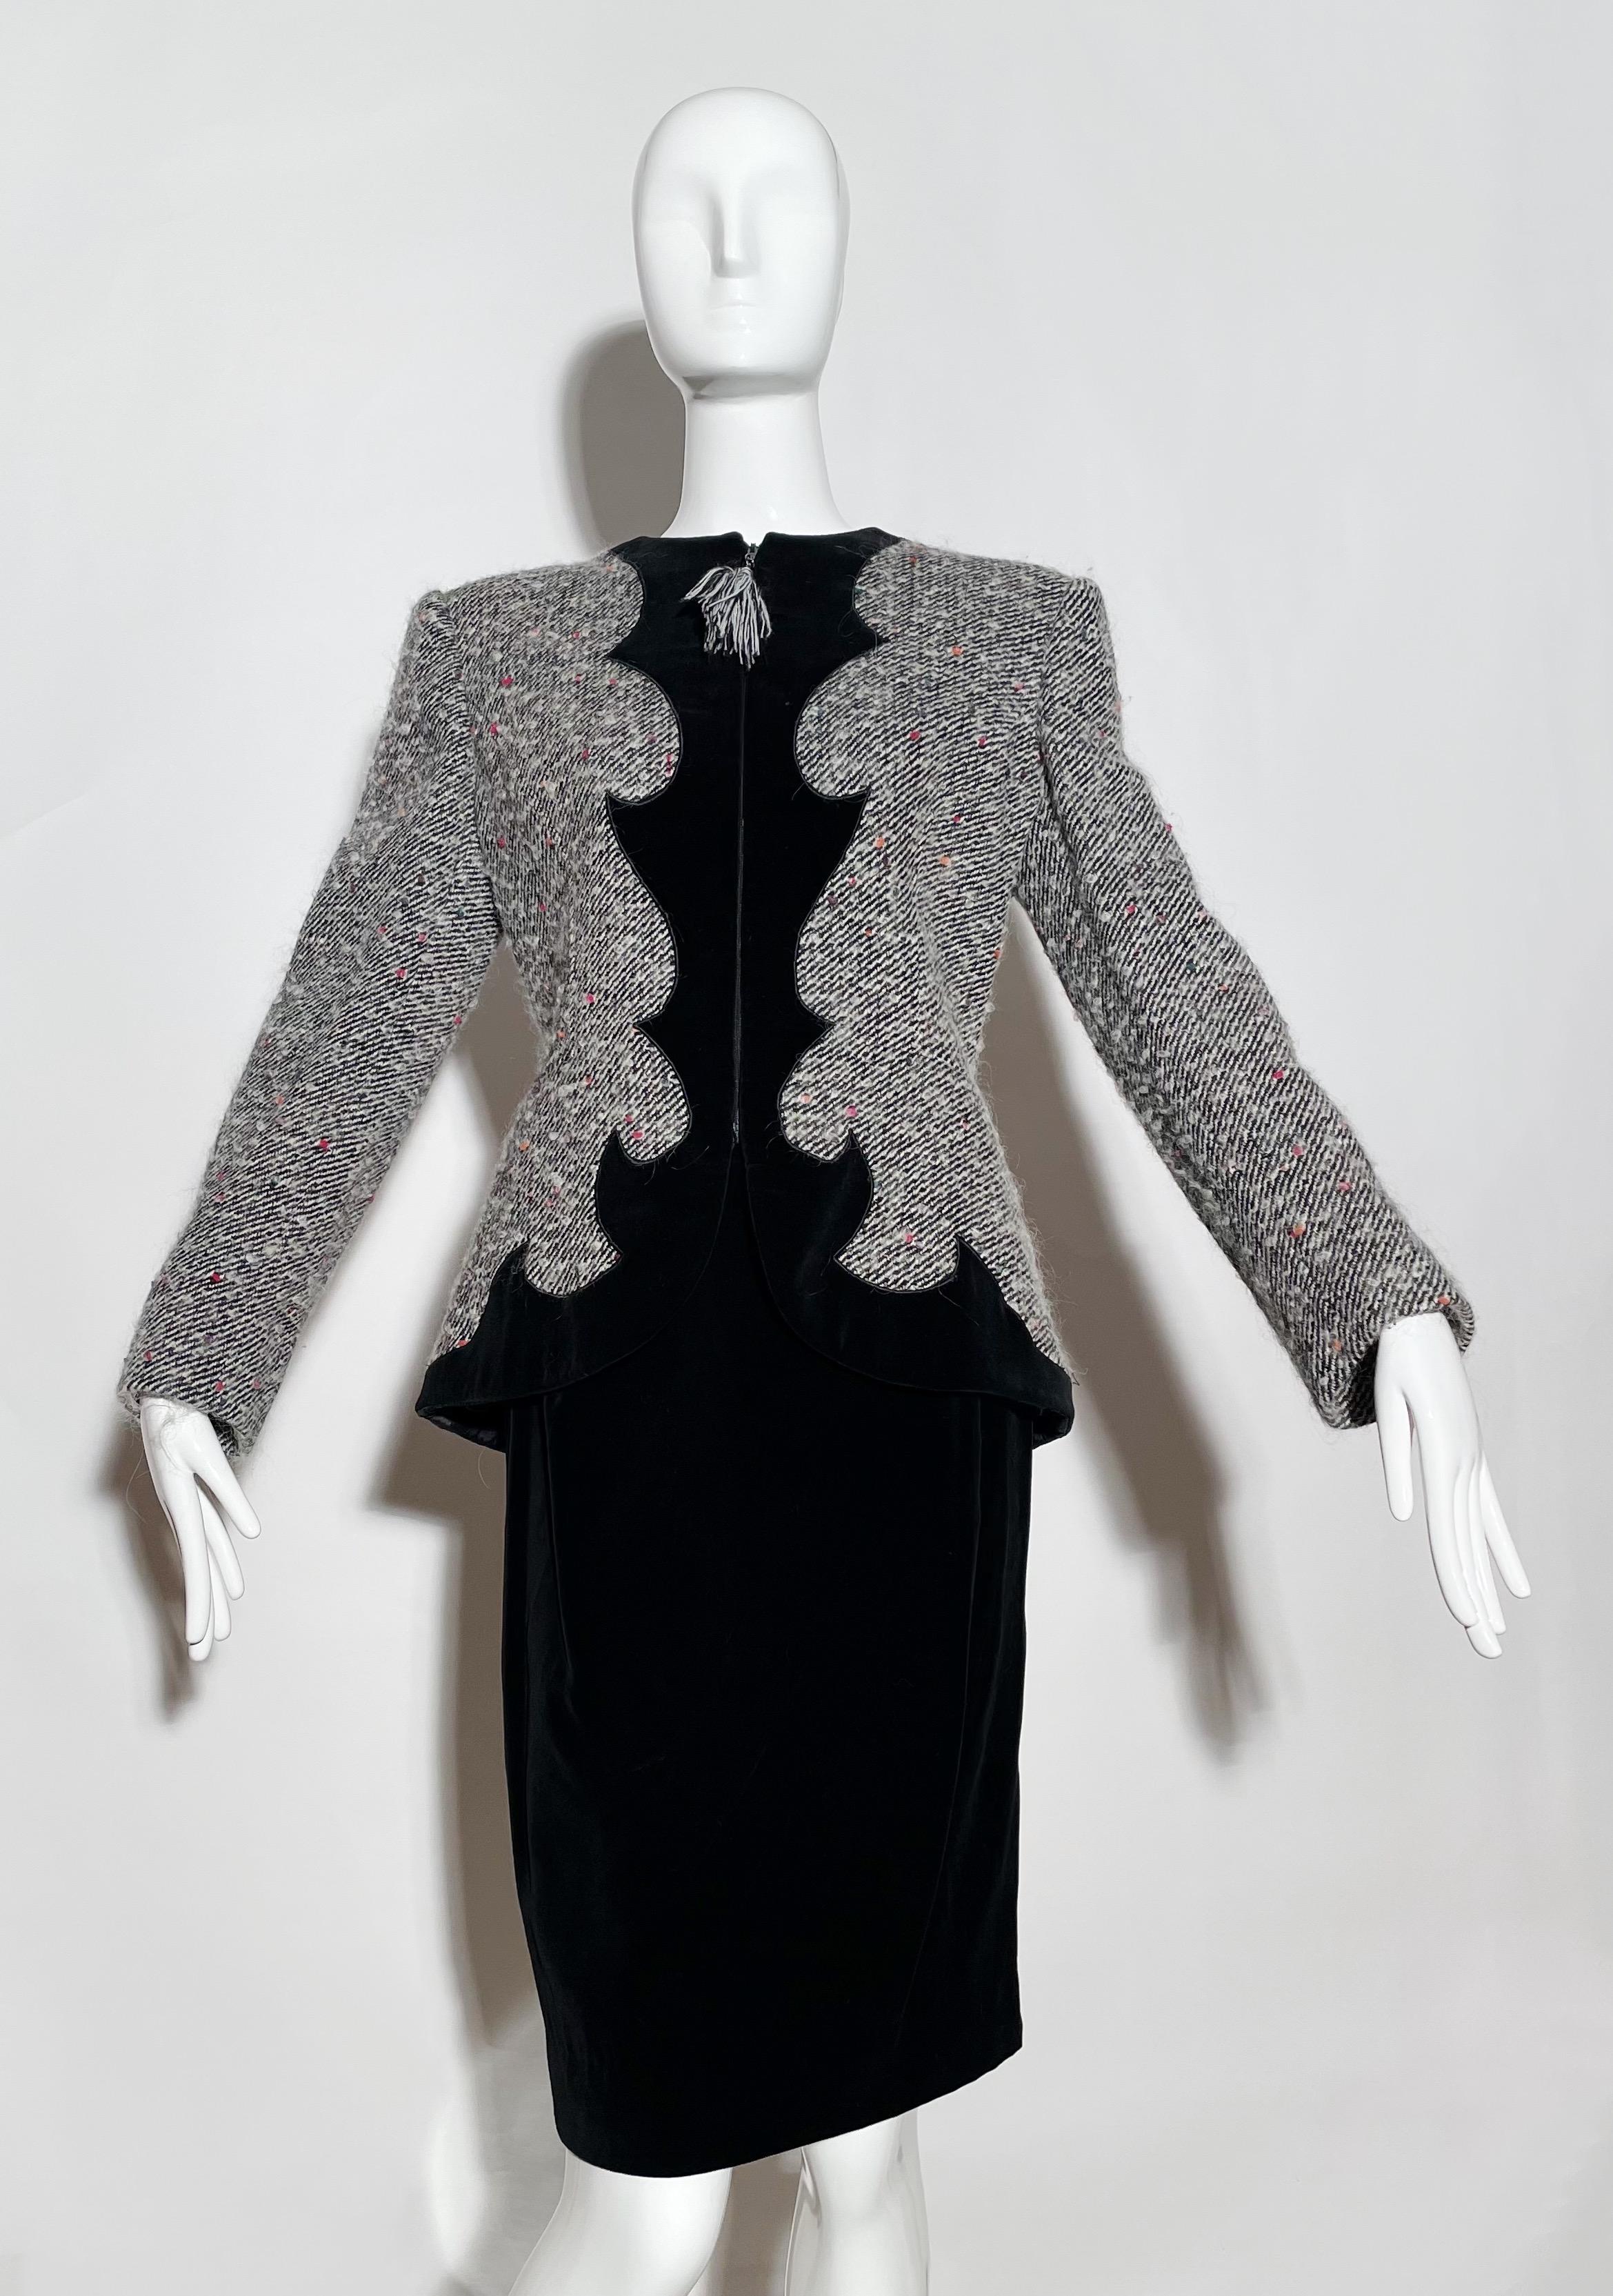 Black and white heavy tweed skirt suit. Front zipper for blazer closure. Shoulder pads. Black velvet skirt. Side zipper closure on skirt. Wool. Lined. Made in France.

*Condition: Excellent vintage condition. No visible Flaws.

Measurements Taken